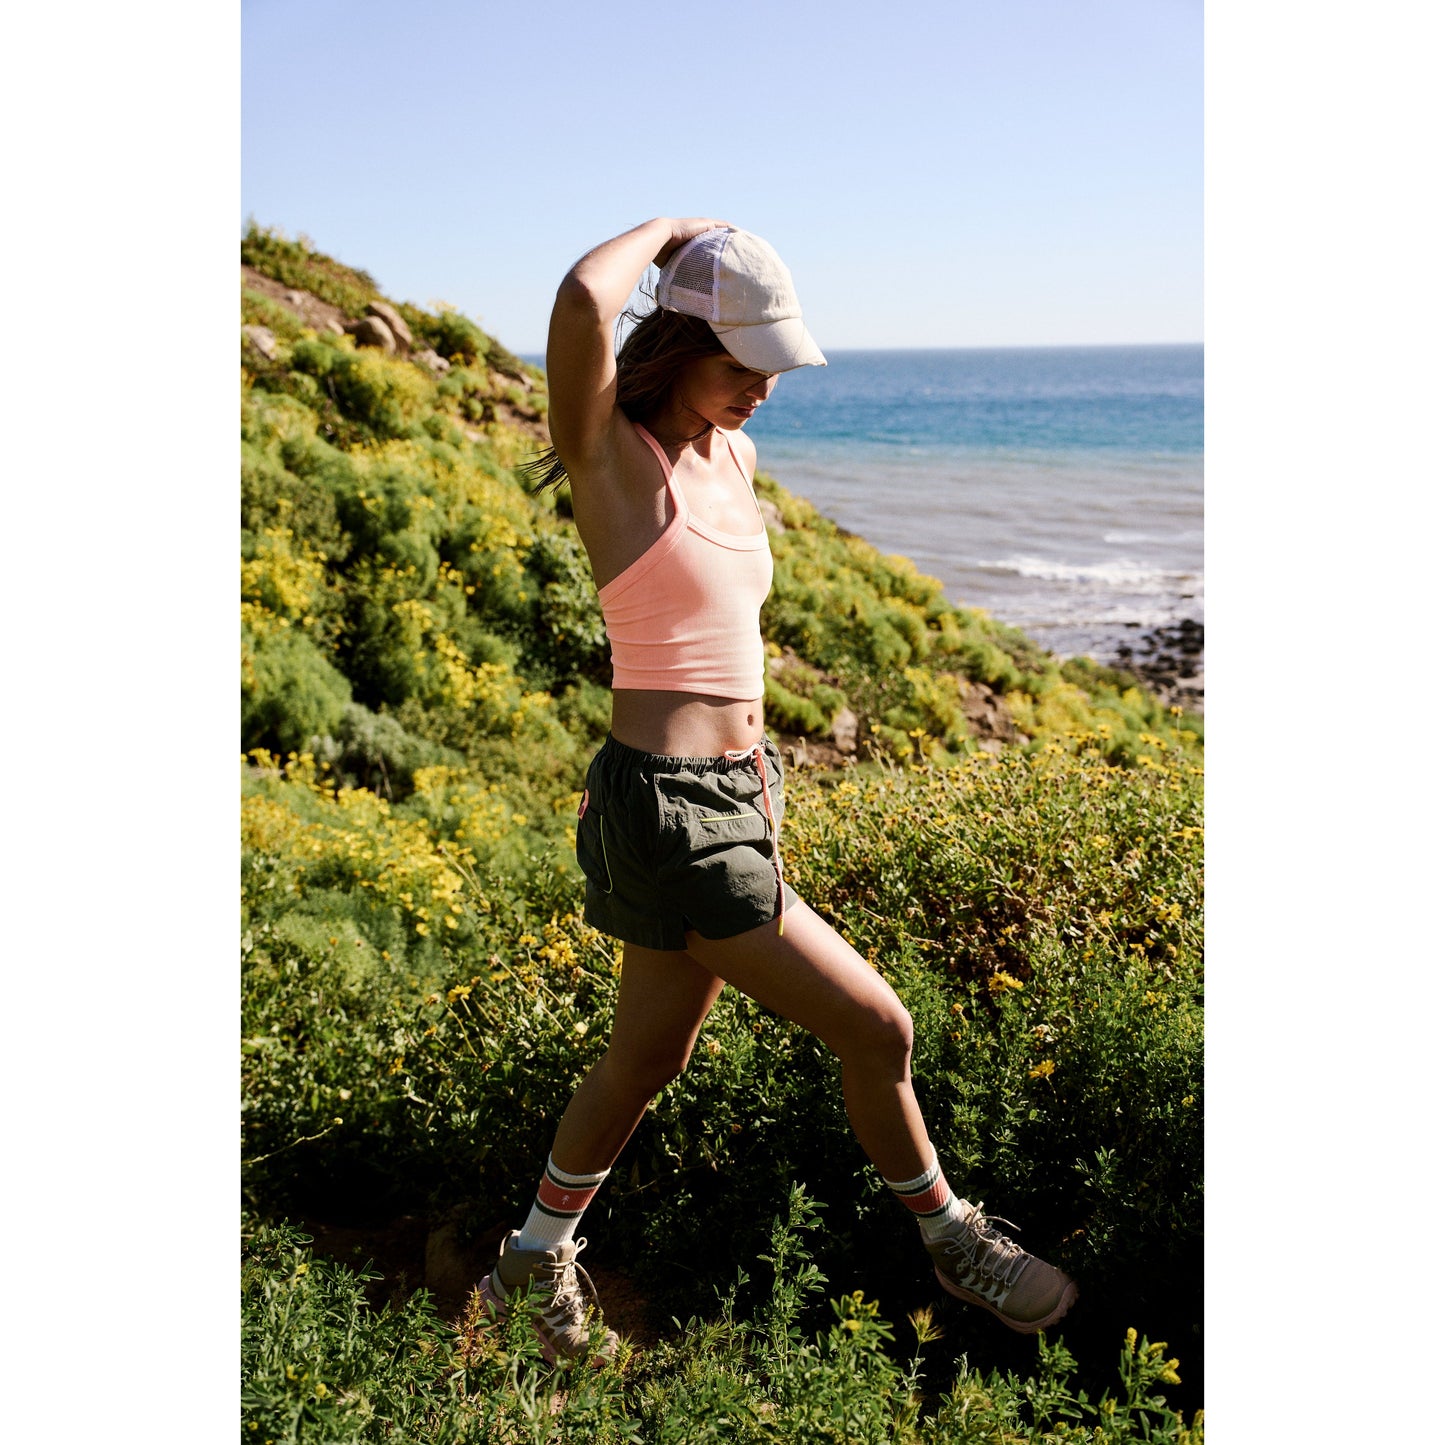 A woman in sports attire hiking through a coastal area wearing the Outskirts Skort in Olive Combo from Free People Movement, with lush greenery and the ocean in the background.